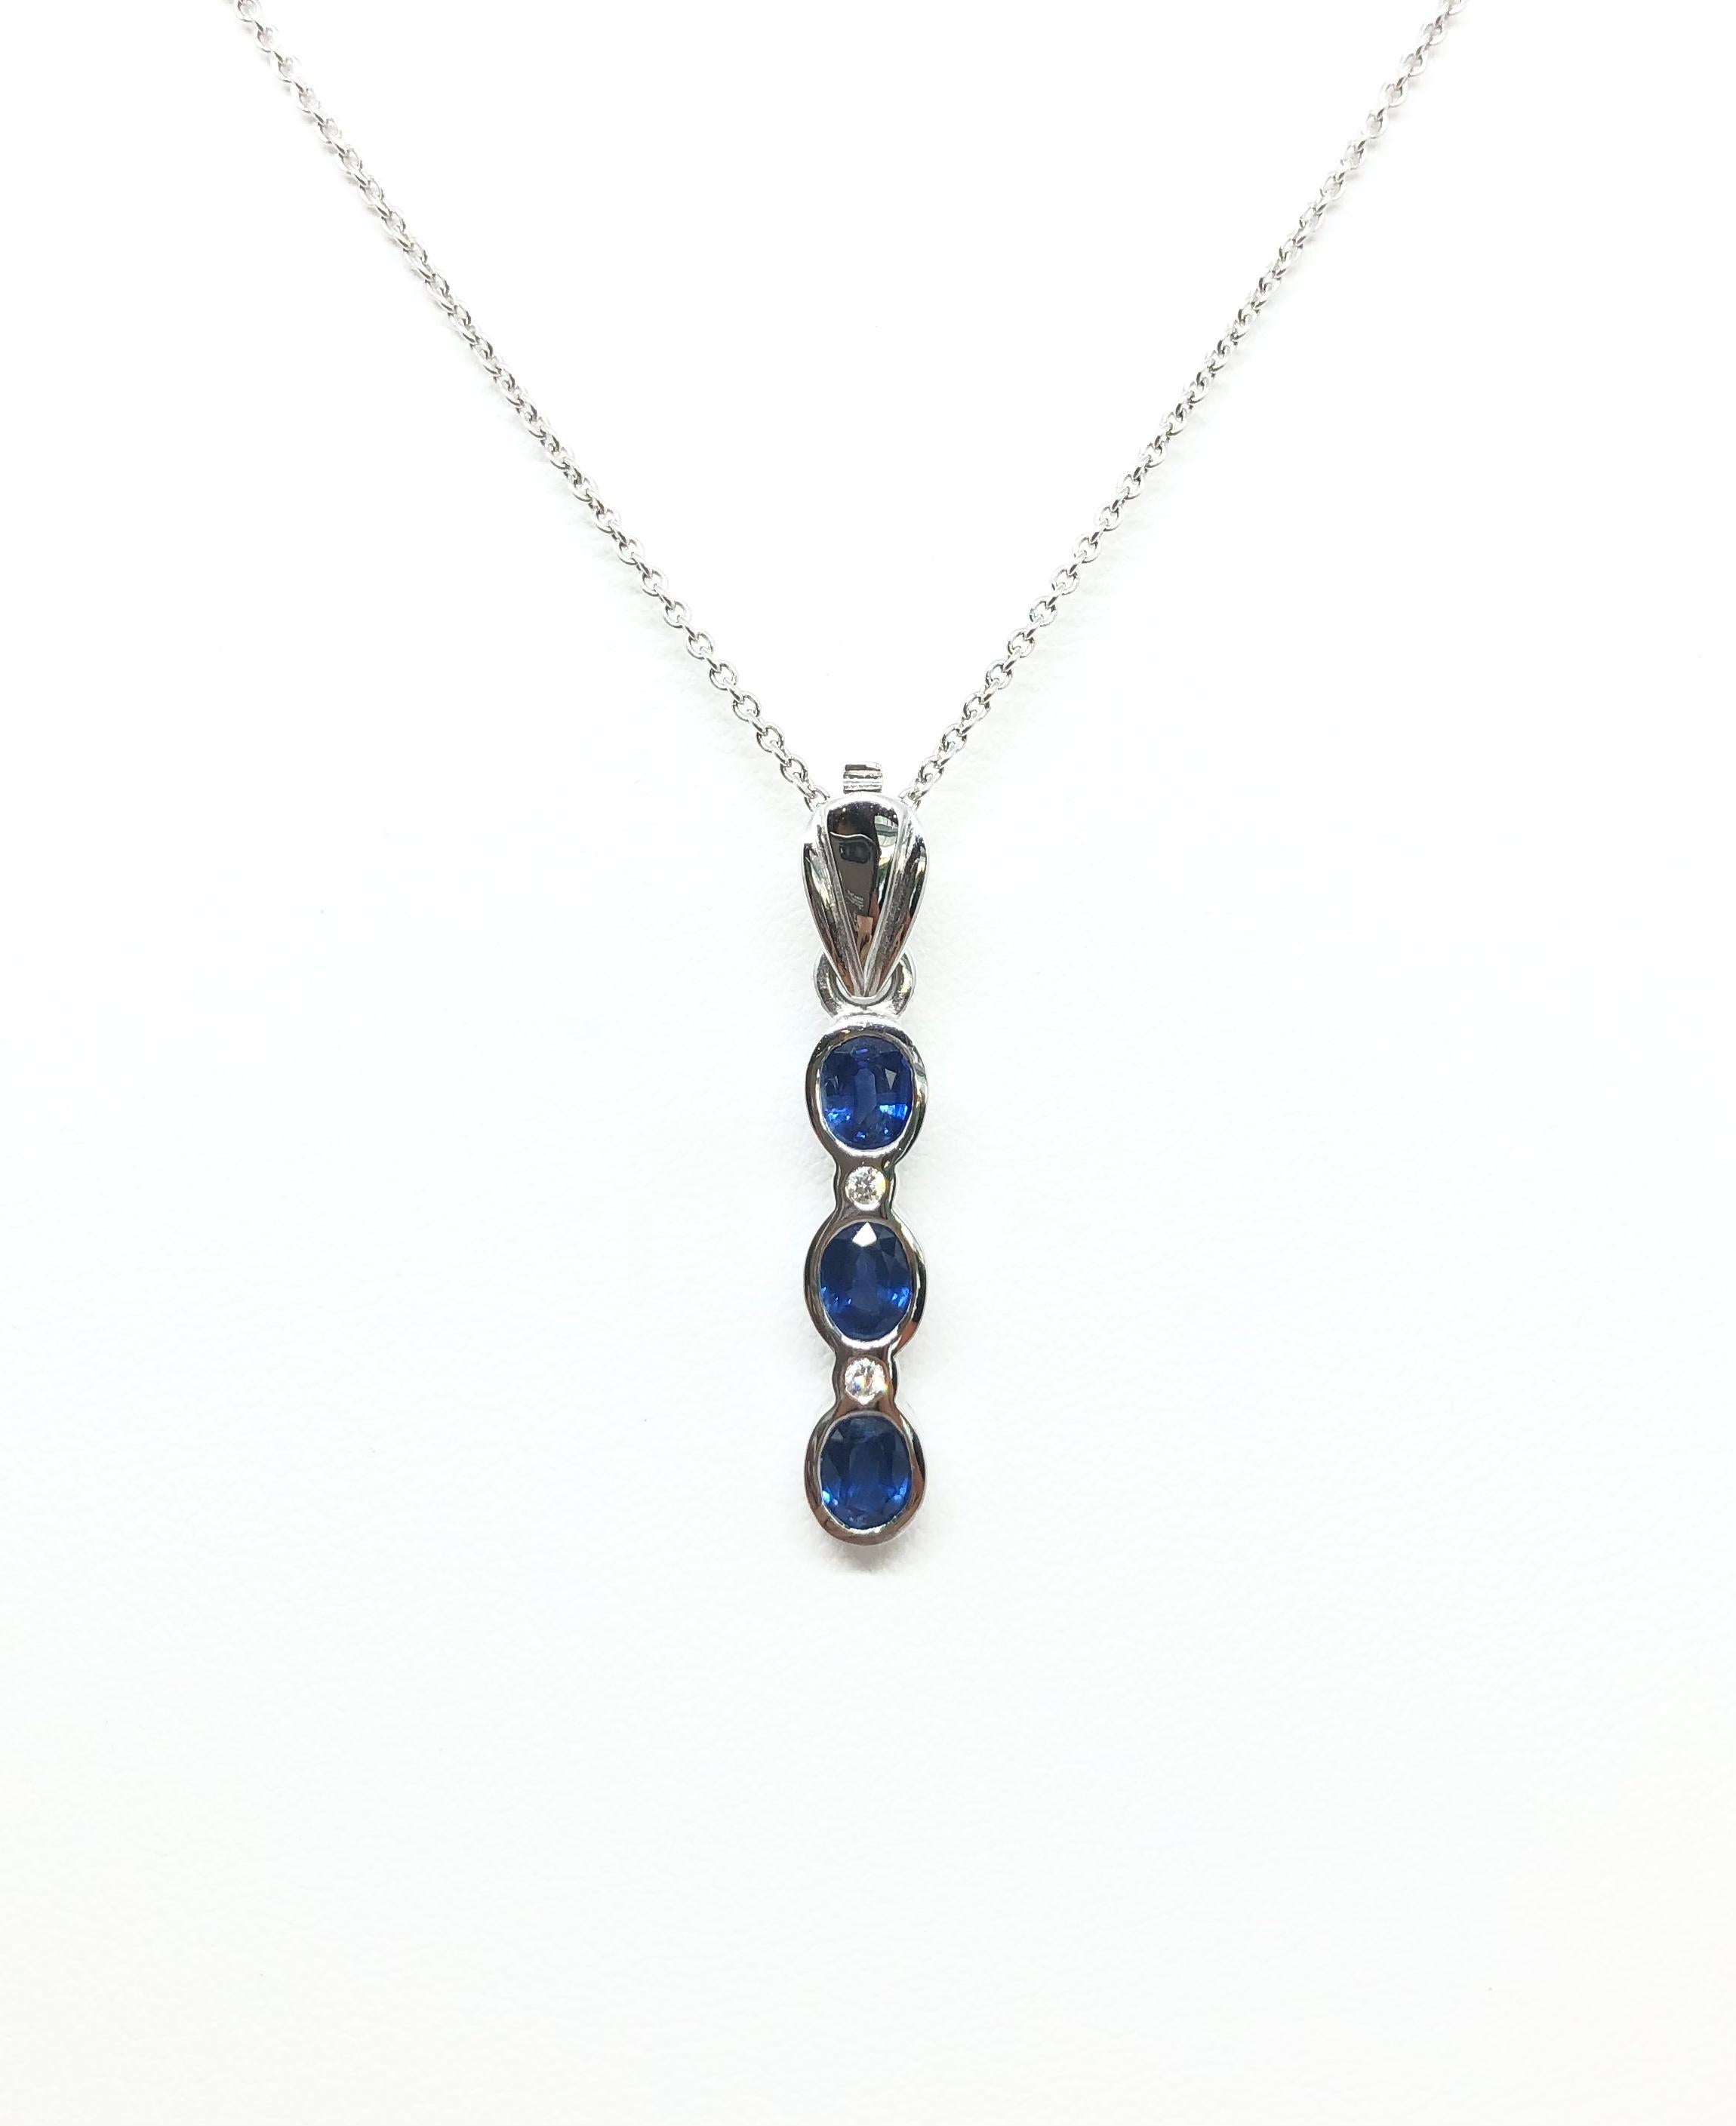 Blue Sapphire 1.49 carats with Diamond 0.04 carat Pendant set in 18 Karat White Gold Settings
(chain not included)

Width: 0.5 cm 
Length: 3.05 cm
Total Weight: 3.73  grams

